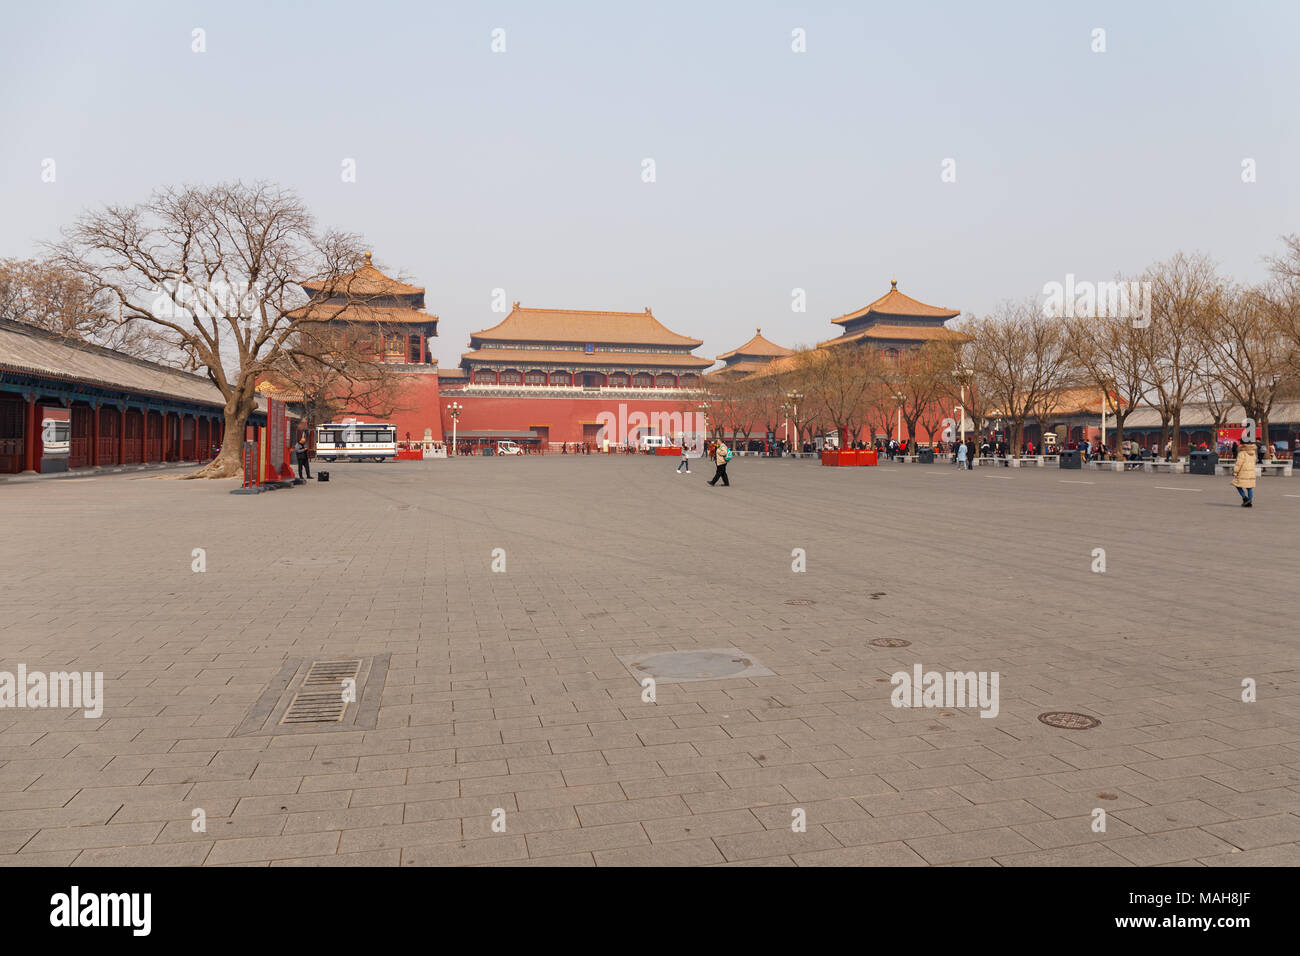 Wide open public square outside the Forbidden City in Beijing, China in March 2018. Stock Photo